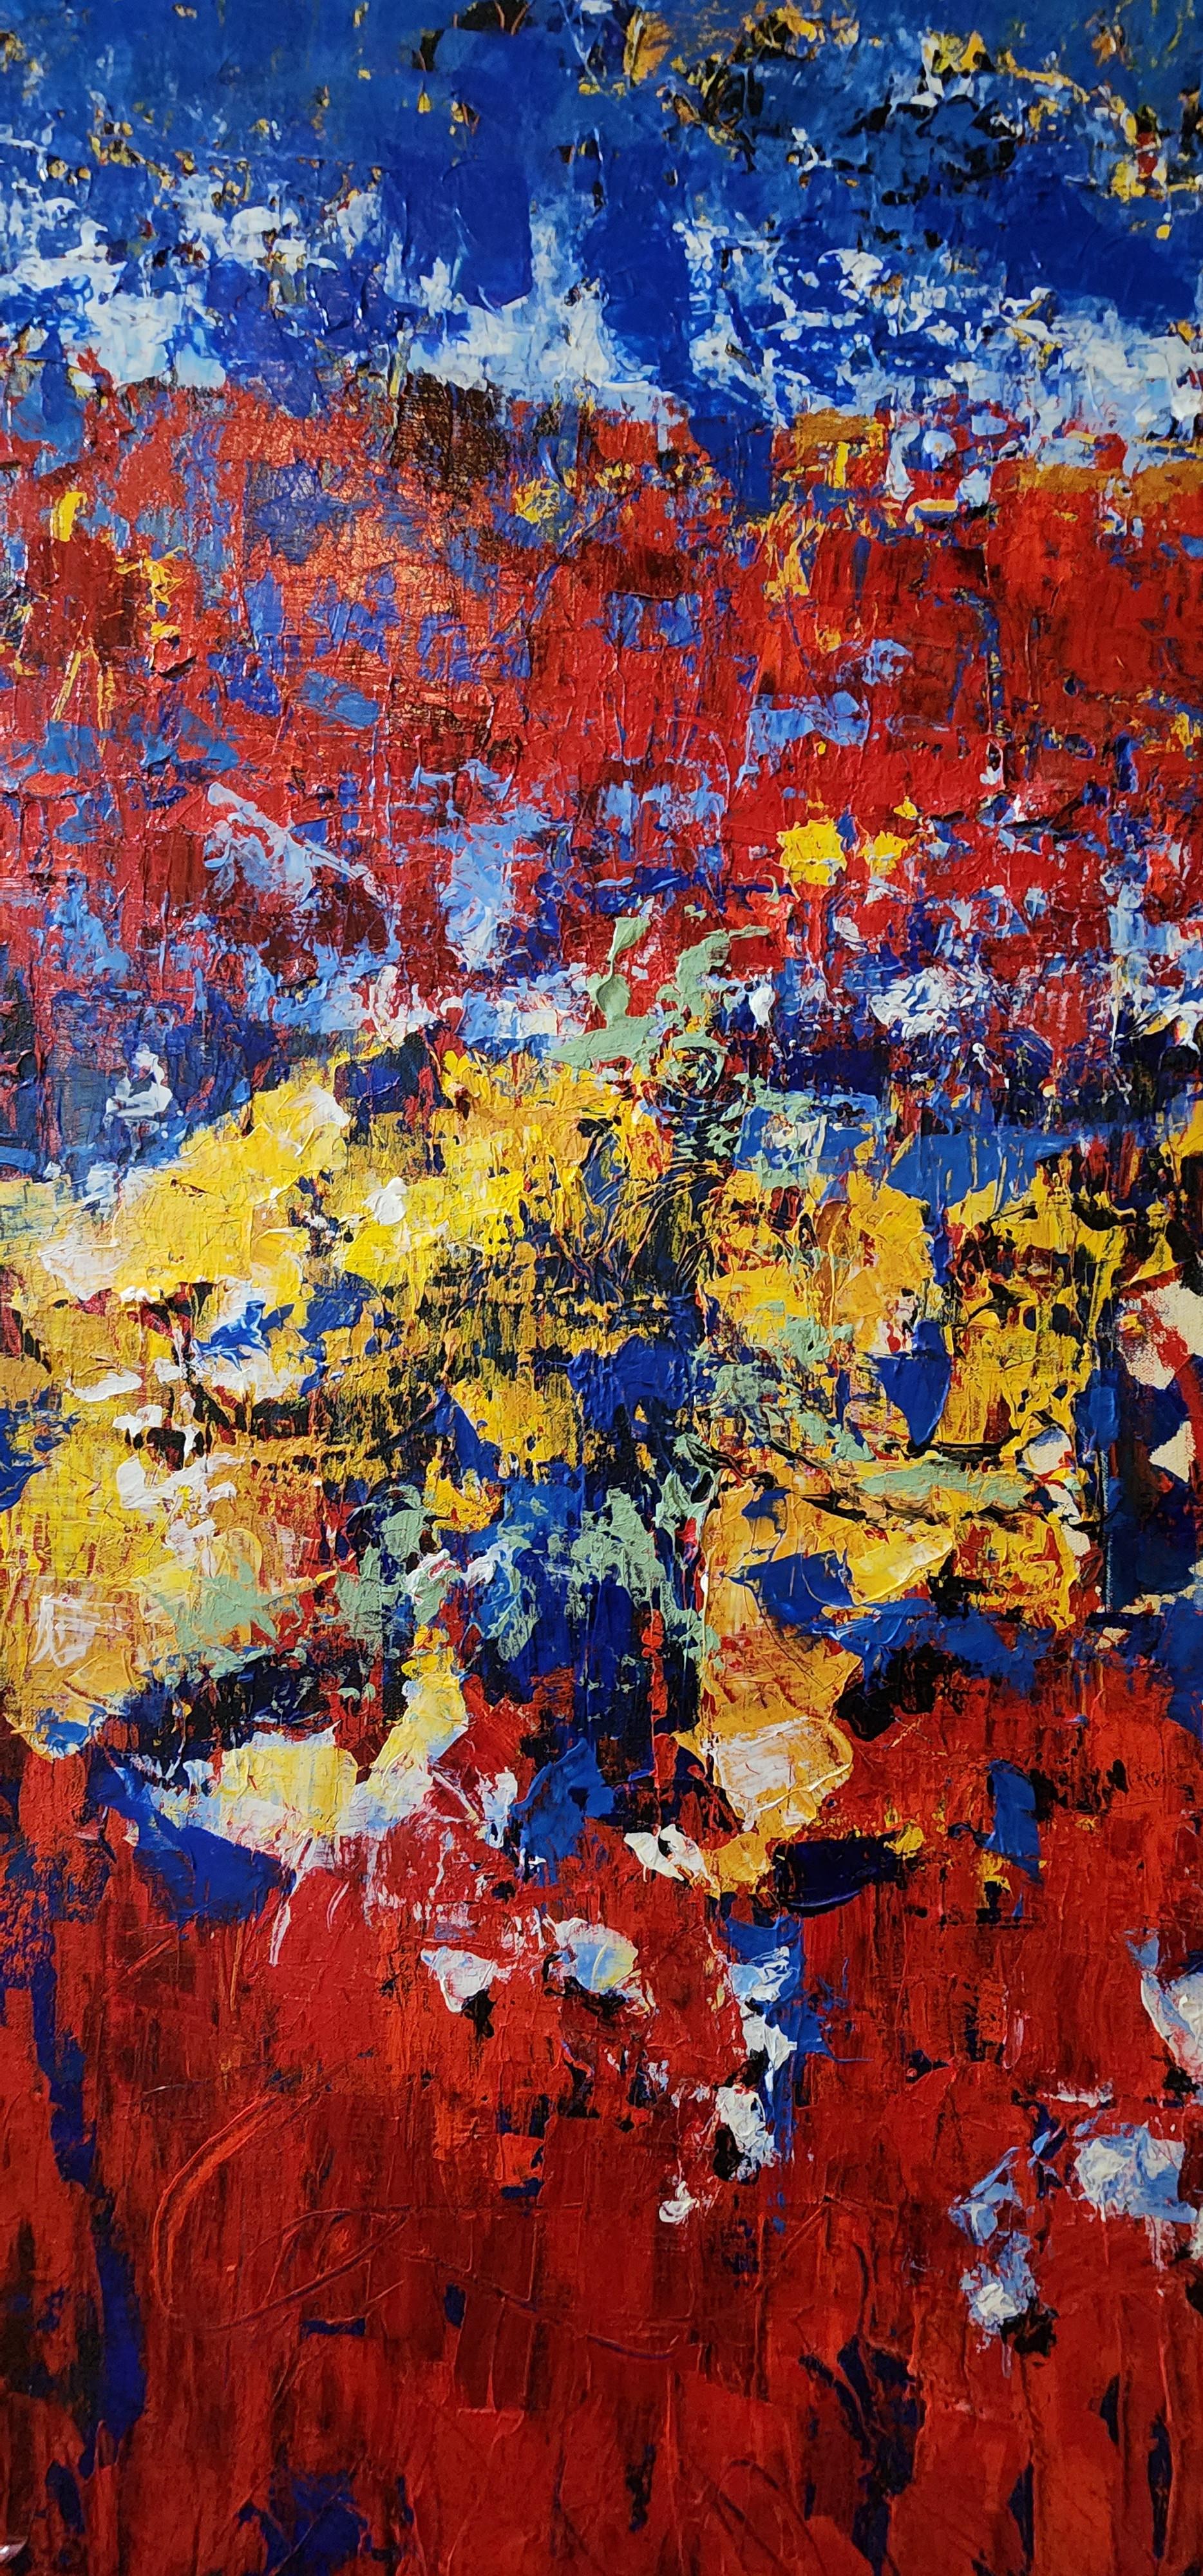 Ted Hinrichs
Desert Evening
Acrylic on Canvas
Year: 2020
Size: 60x24x1.5in
Signed by hand
COA provided
Ref.: 24802-1717
*on Stretcher Frame ready to hang

Tags: Abstract, Acrylic, Gestural Abstraction, Red, Blue, Brown, Black, Drips, Splatter

Ted